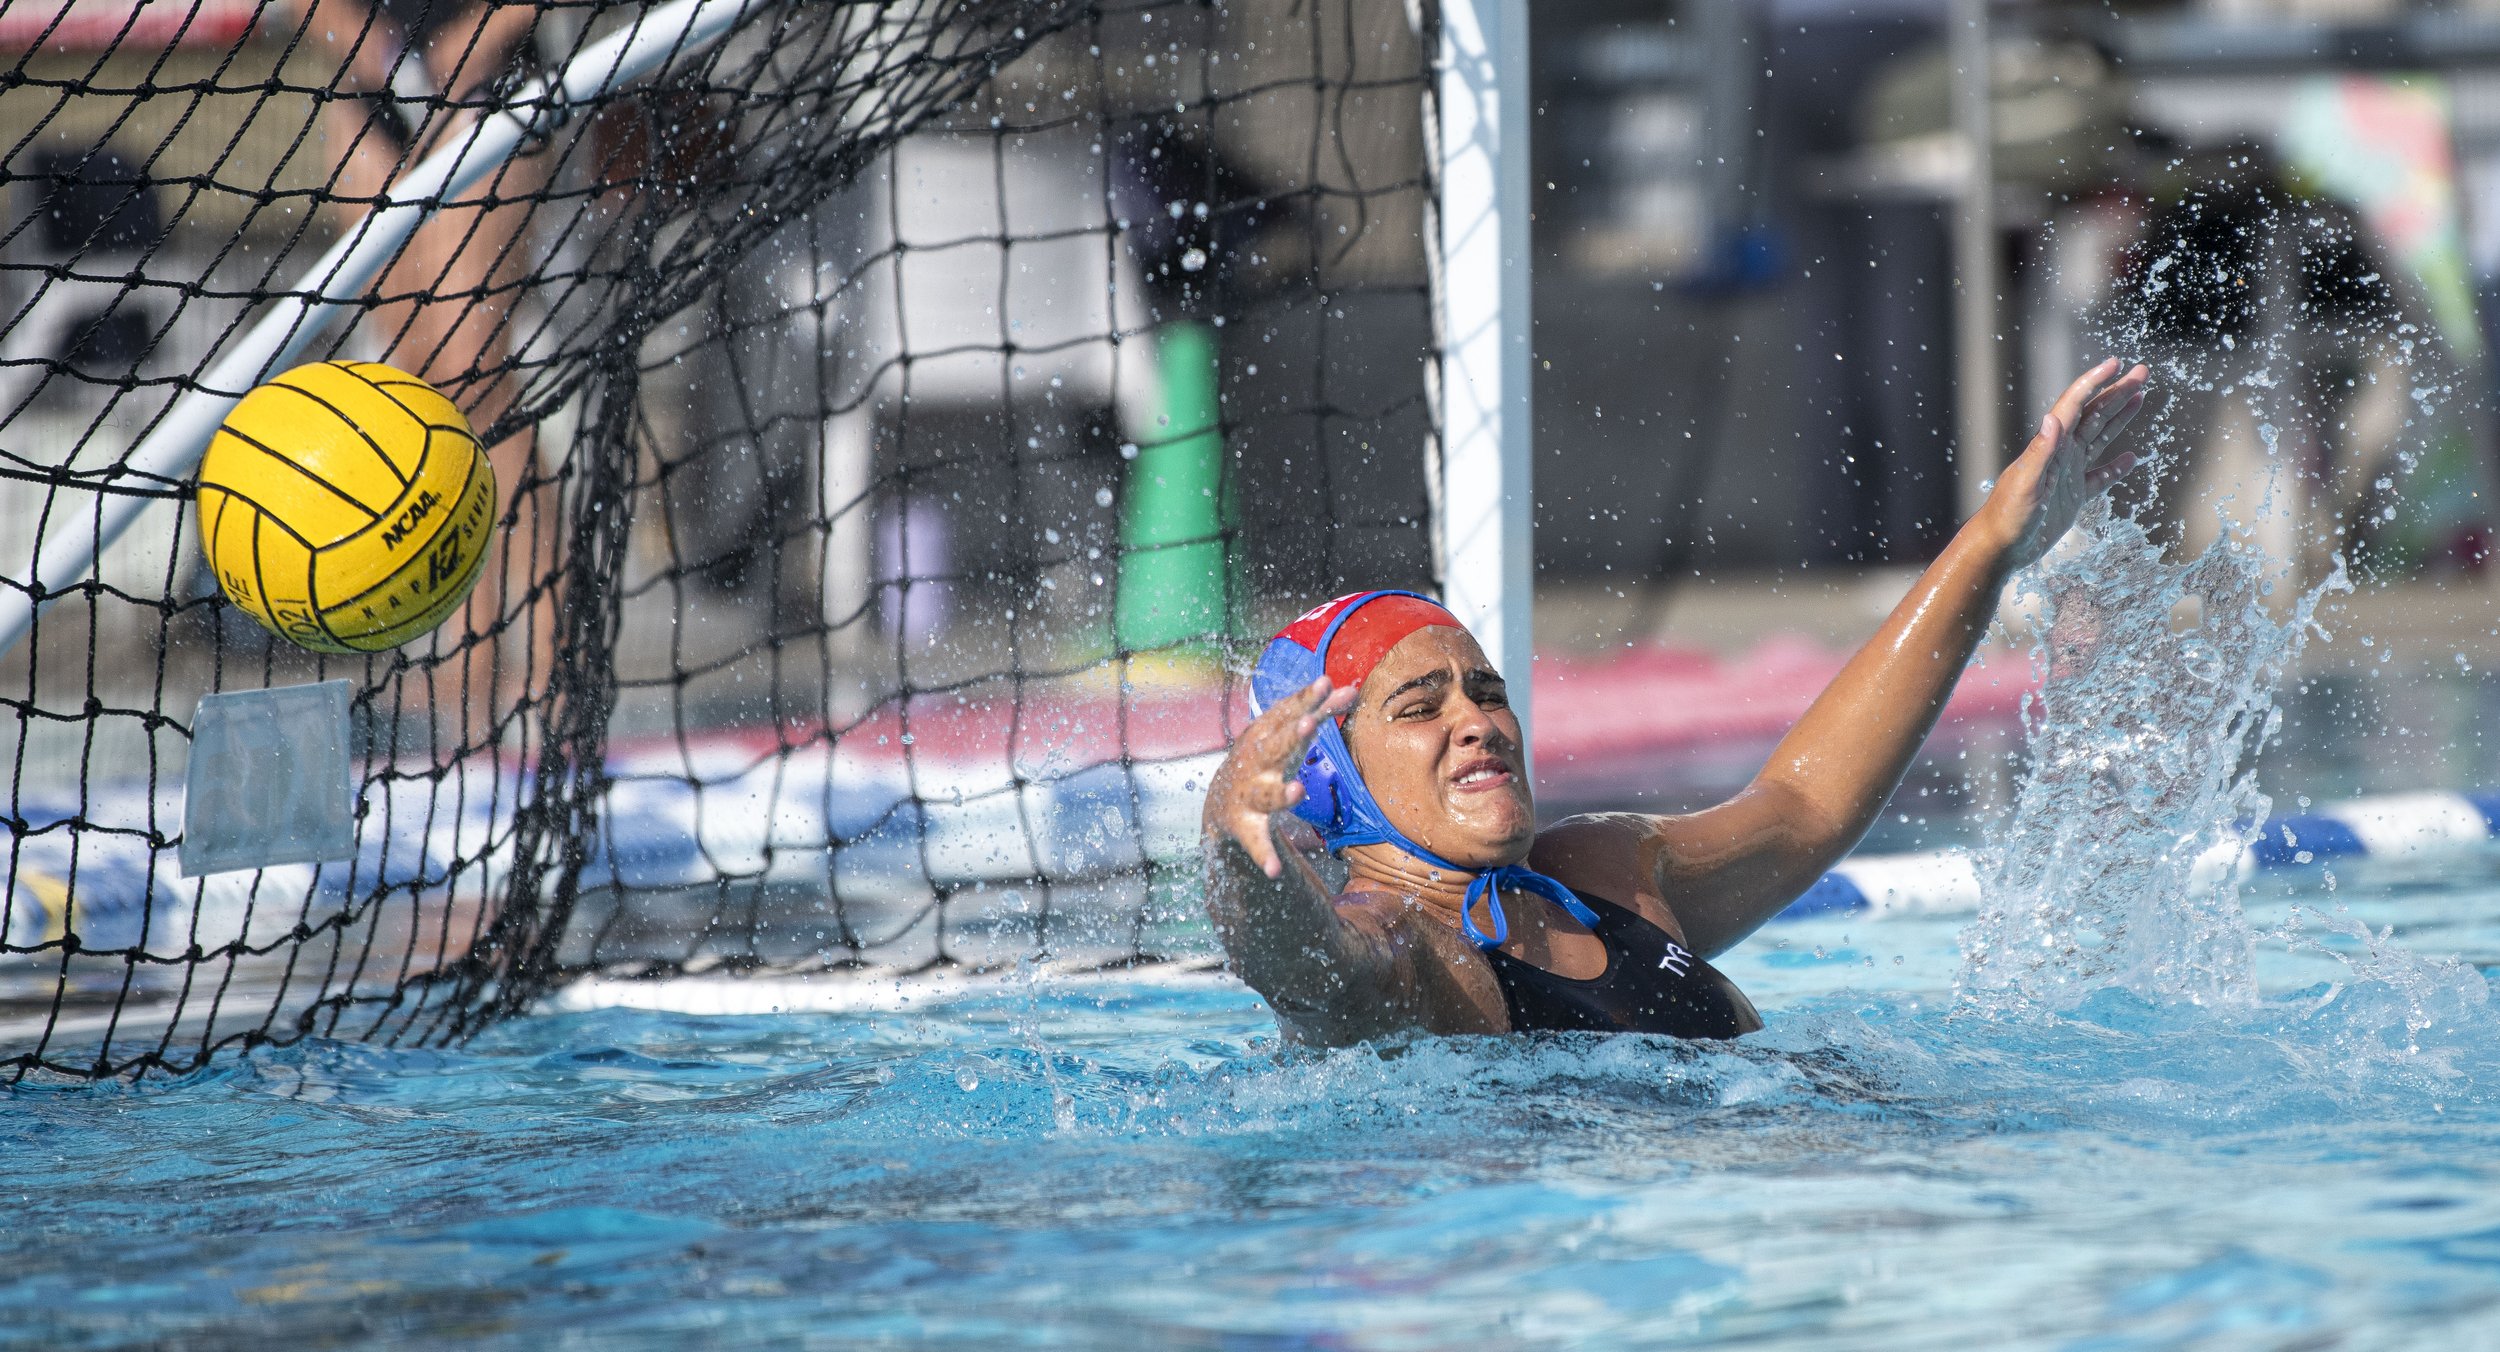  Santa Monica College Freshman Goalie Ginger Garret (1) misses a shot attempt from a Valley College player which ultimately led to a goal. (Jon Putman | The Corsair) 